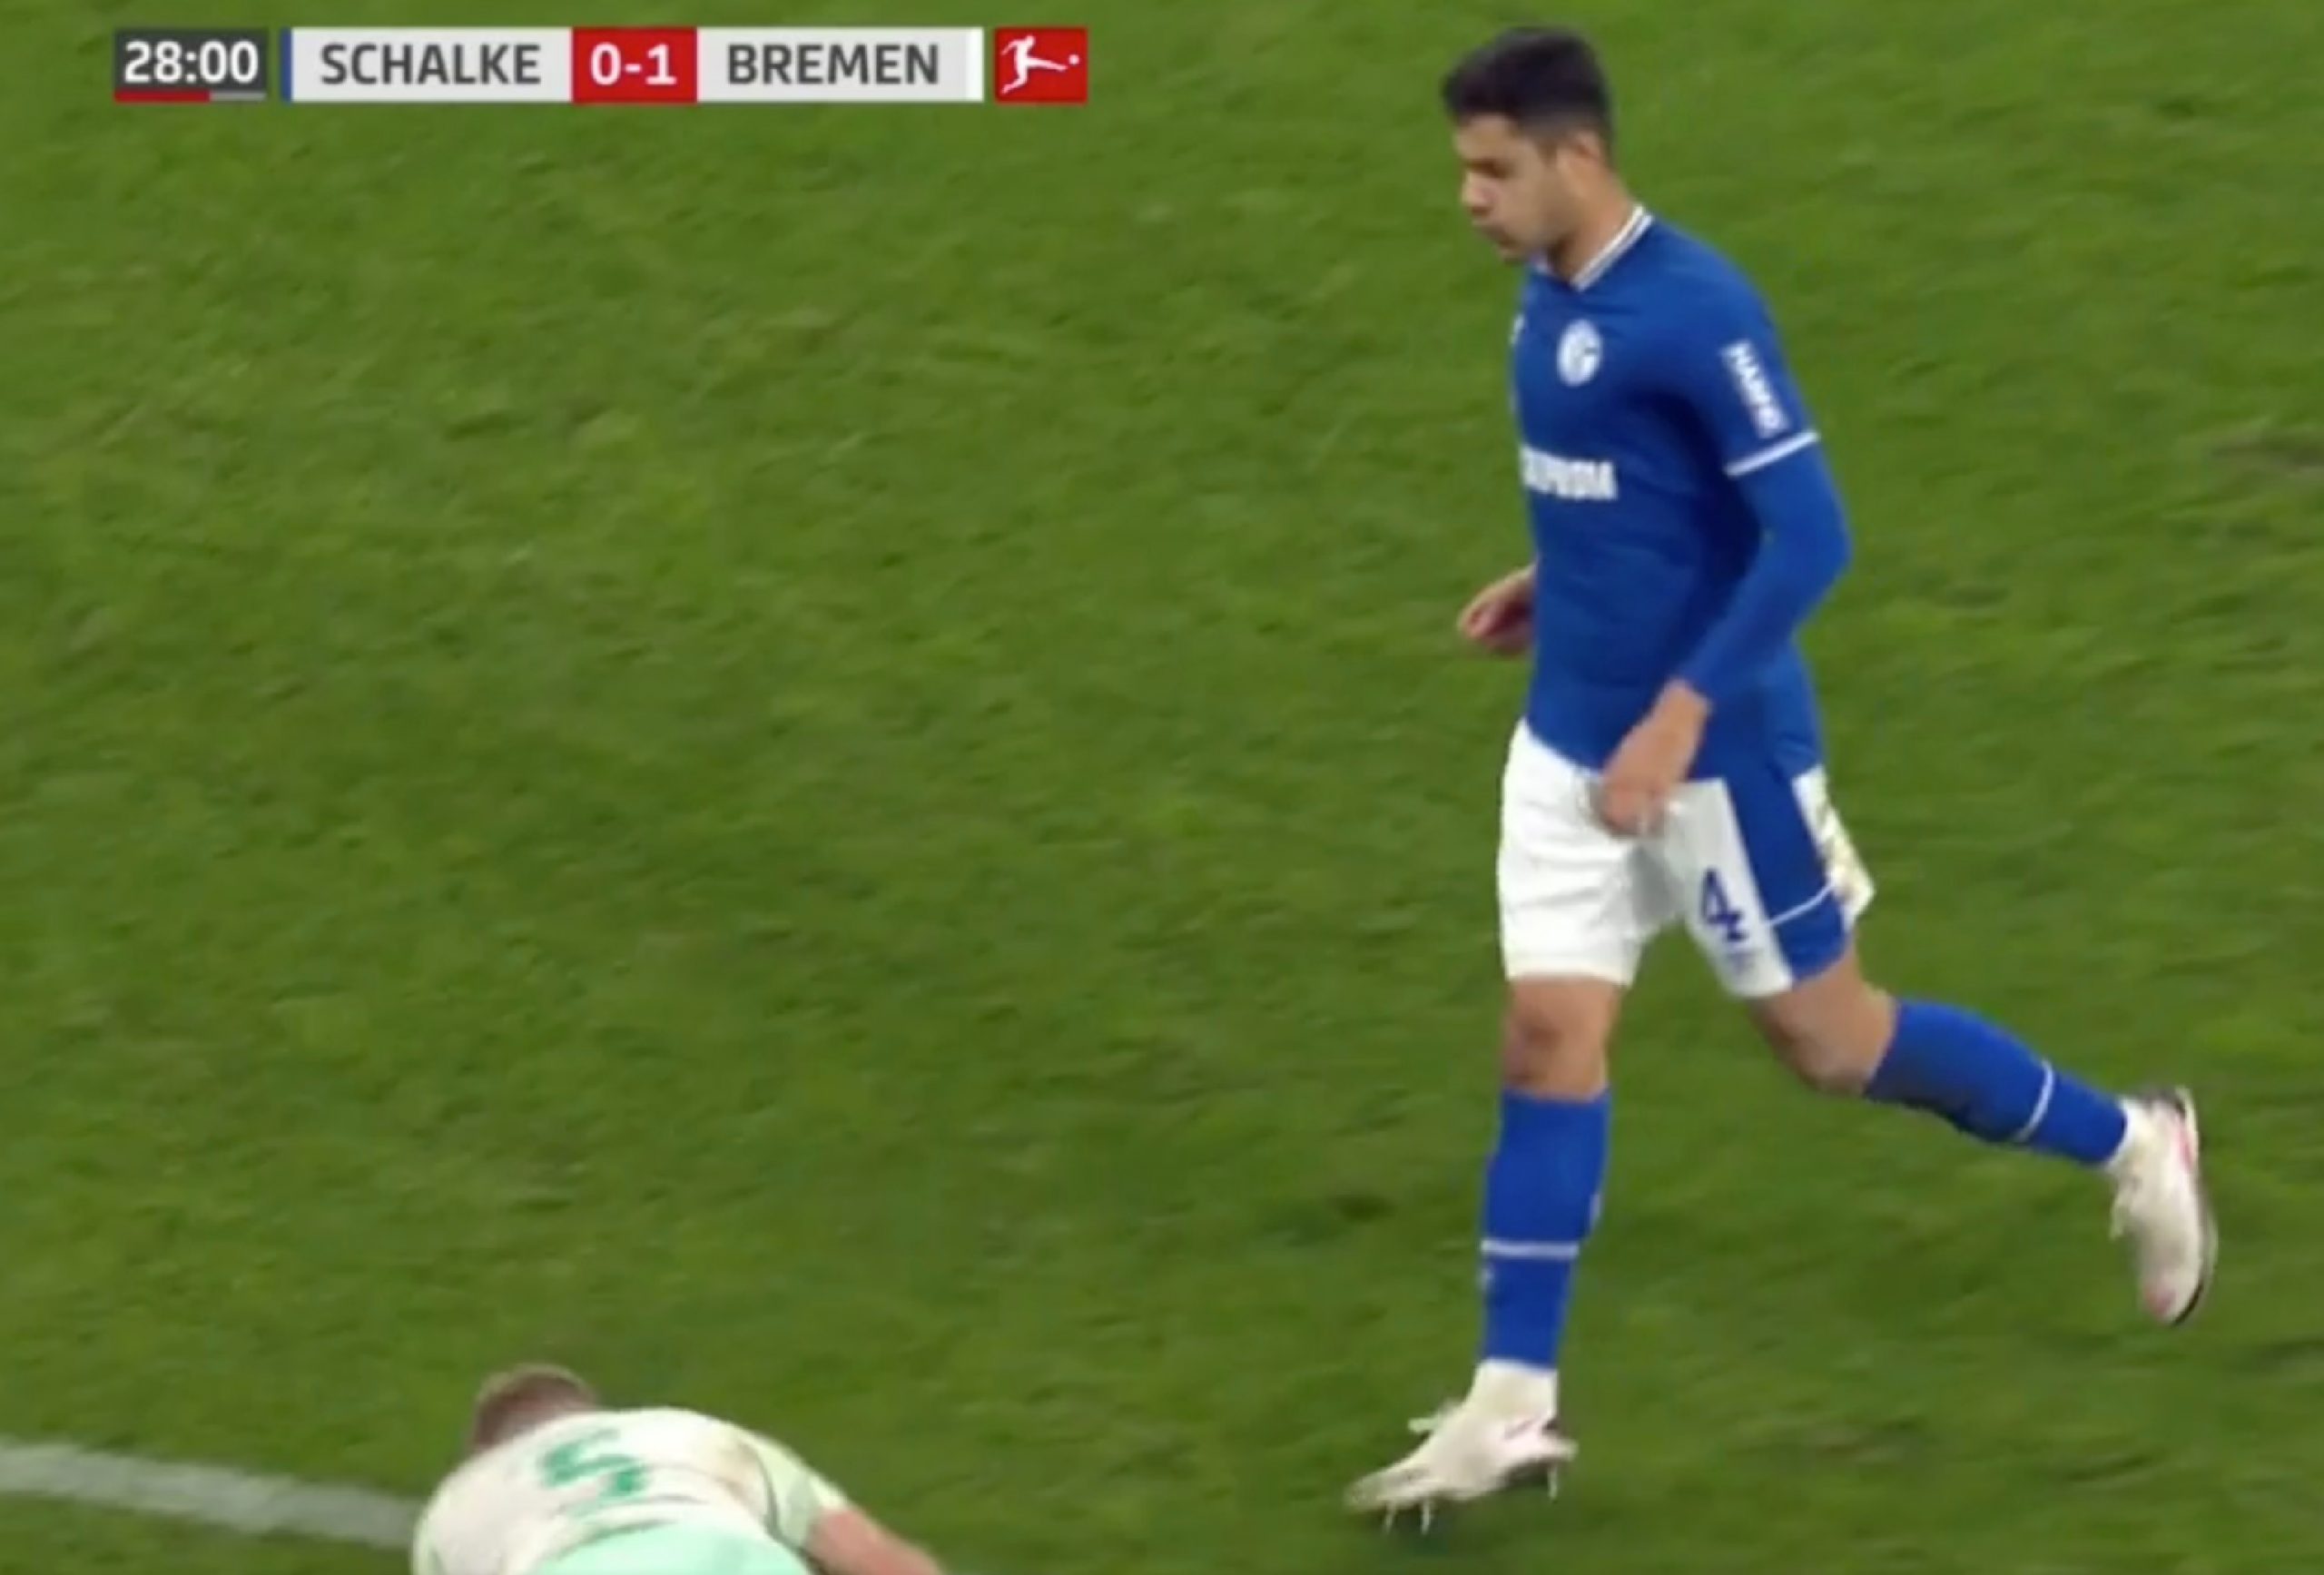 Vile – Ozan Kabak spits on Ludwig Augustinsson for going down too easy after a tackle